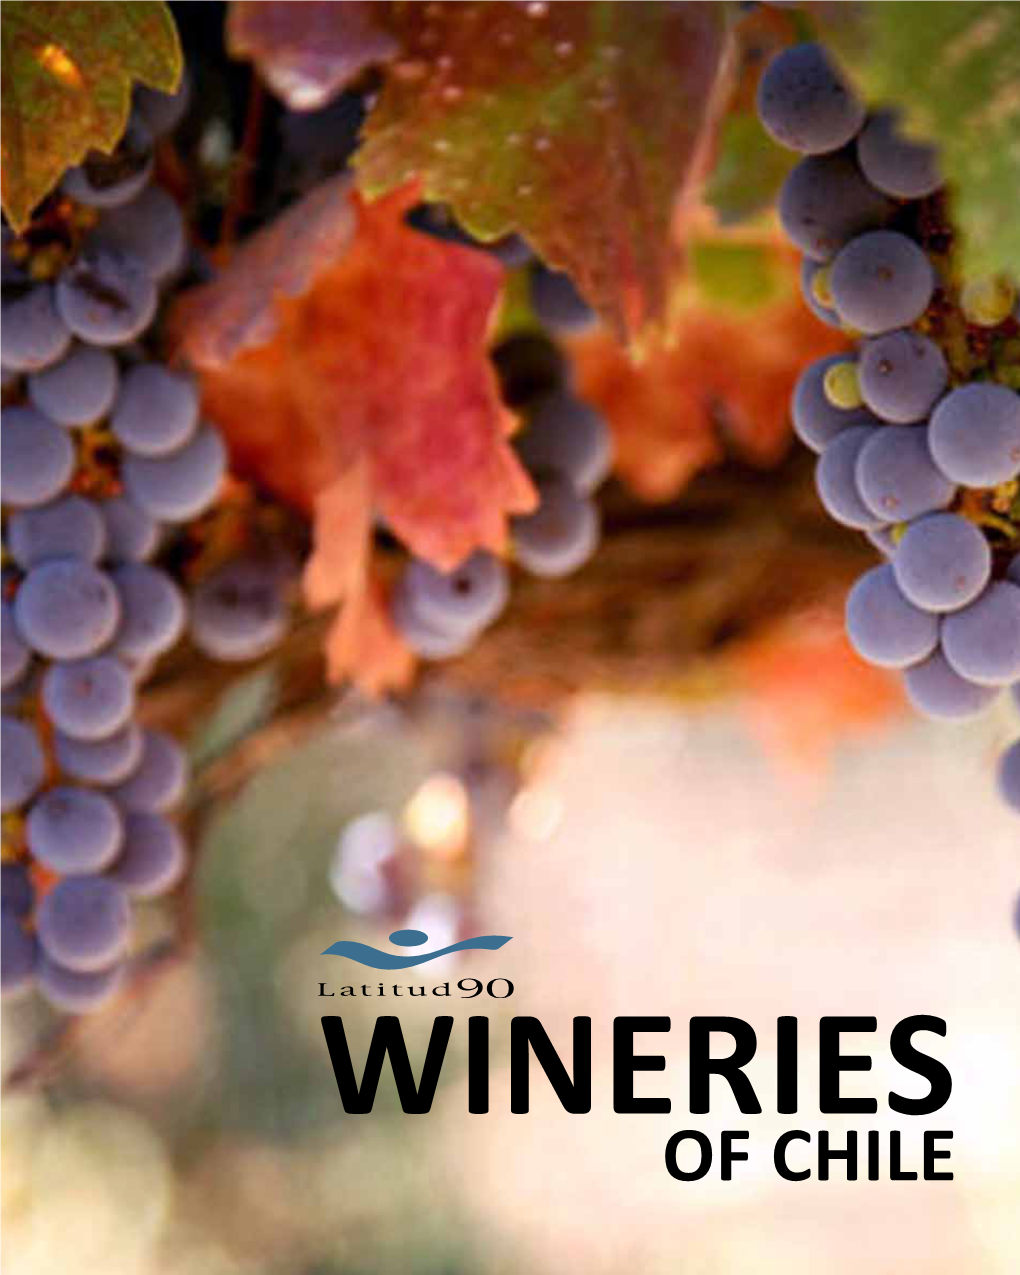 WINERIES of CHILE Chile Is Nowadays Recognized Internationally As a Major Producer and Exporter of Wine